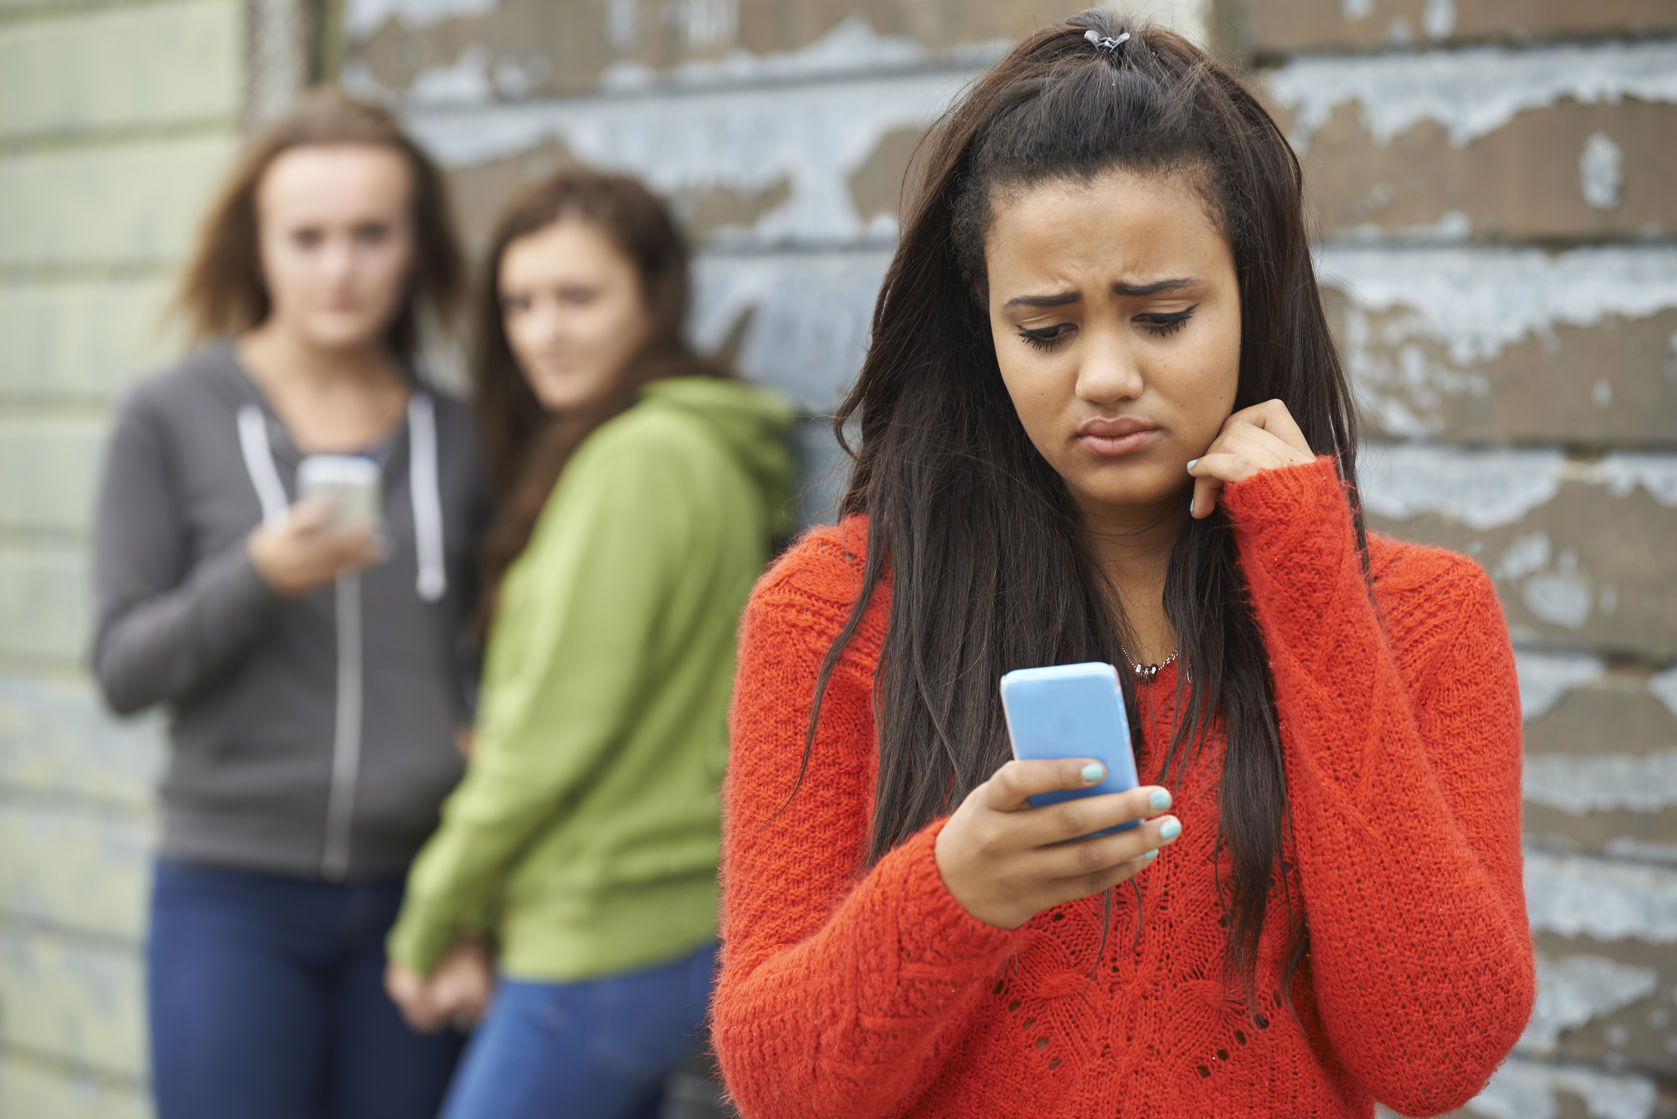 cyberbullying statistics 2017 ditch the label 45009248  teenage girl being bullied by text message